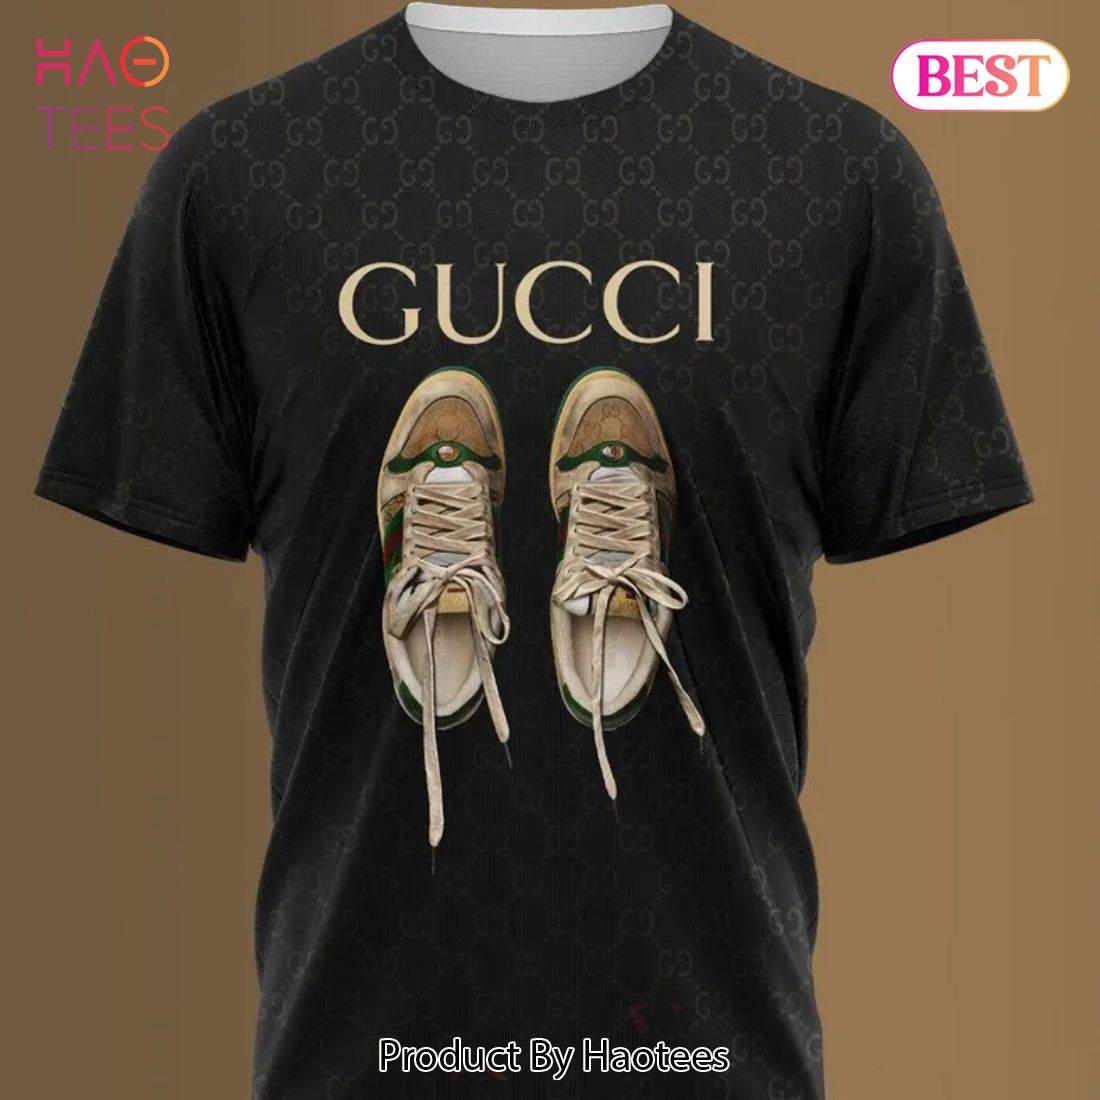 NEW FASHION] Gucci Shoes Black Luxury Brand T-Shirt Outfit For Men Women